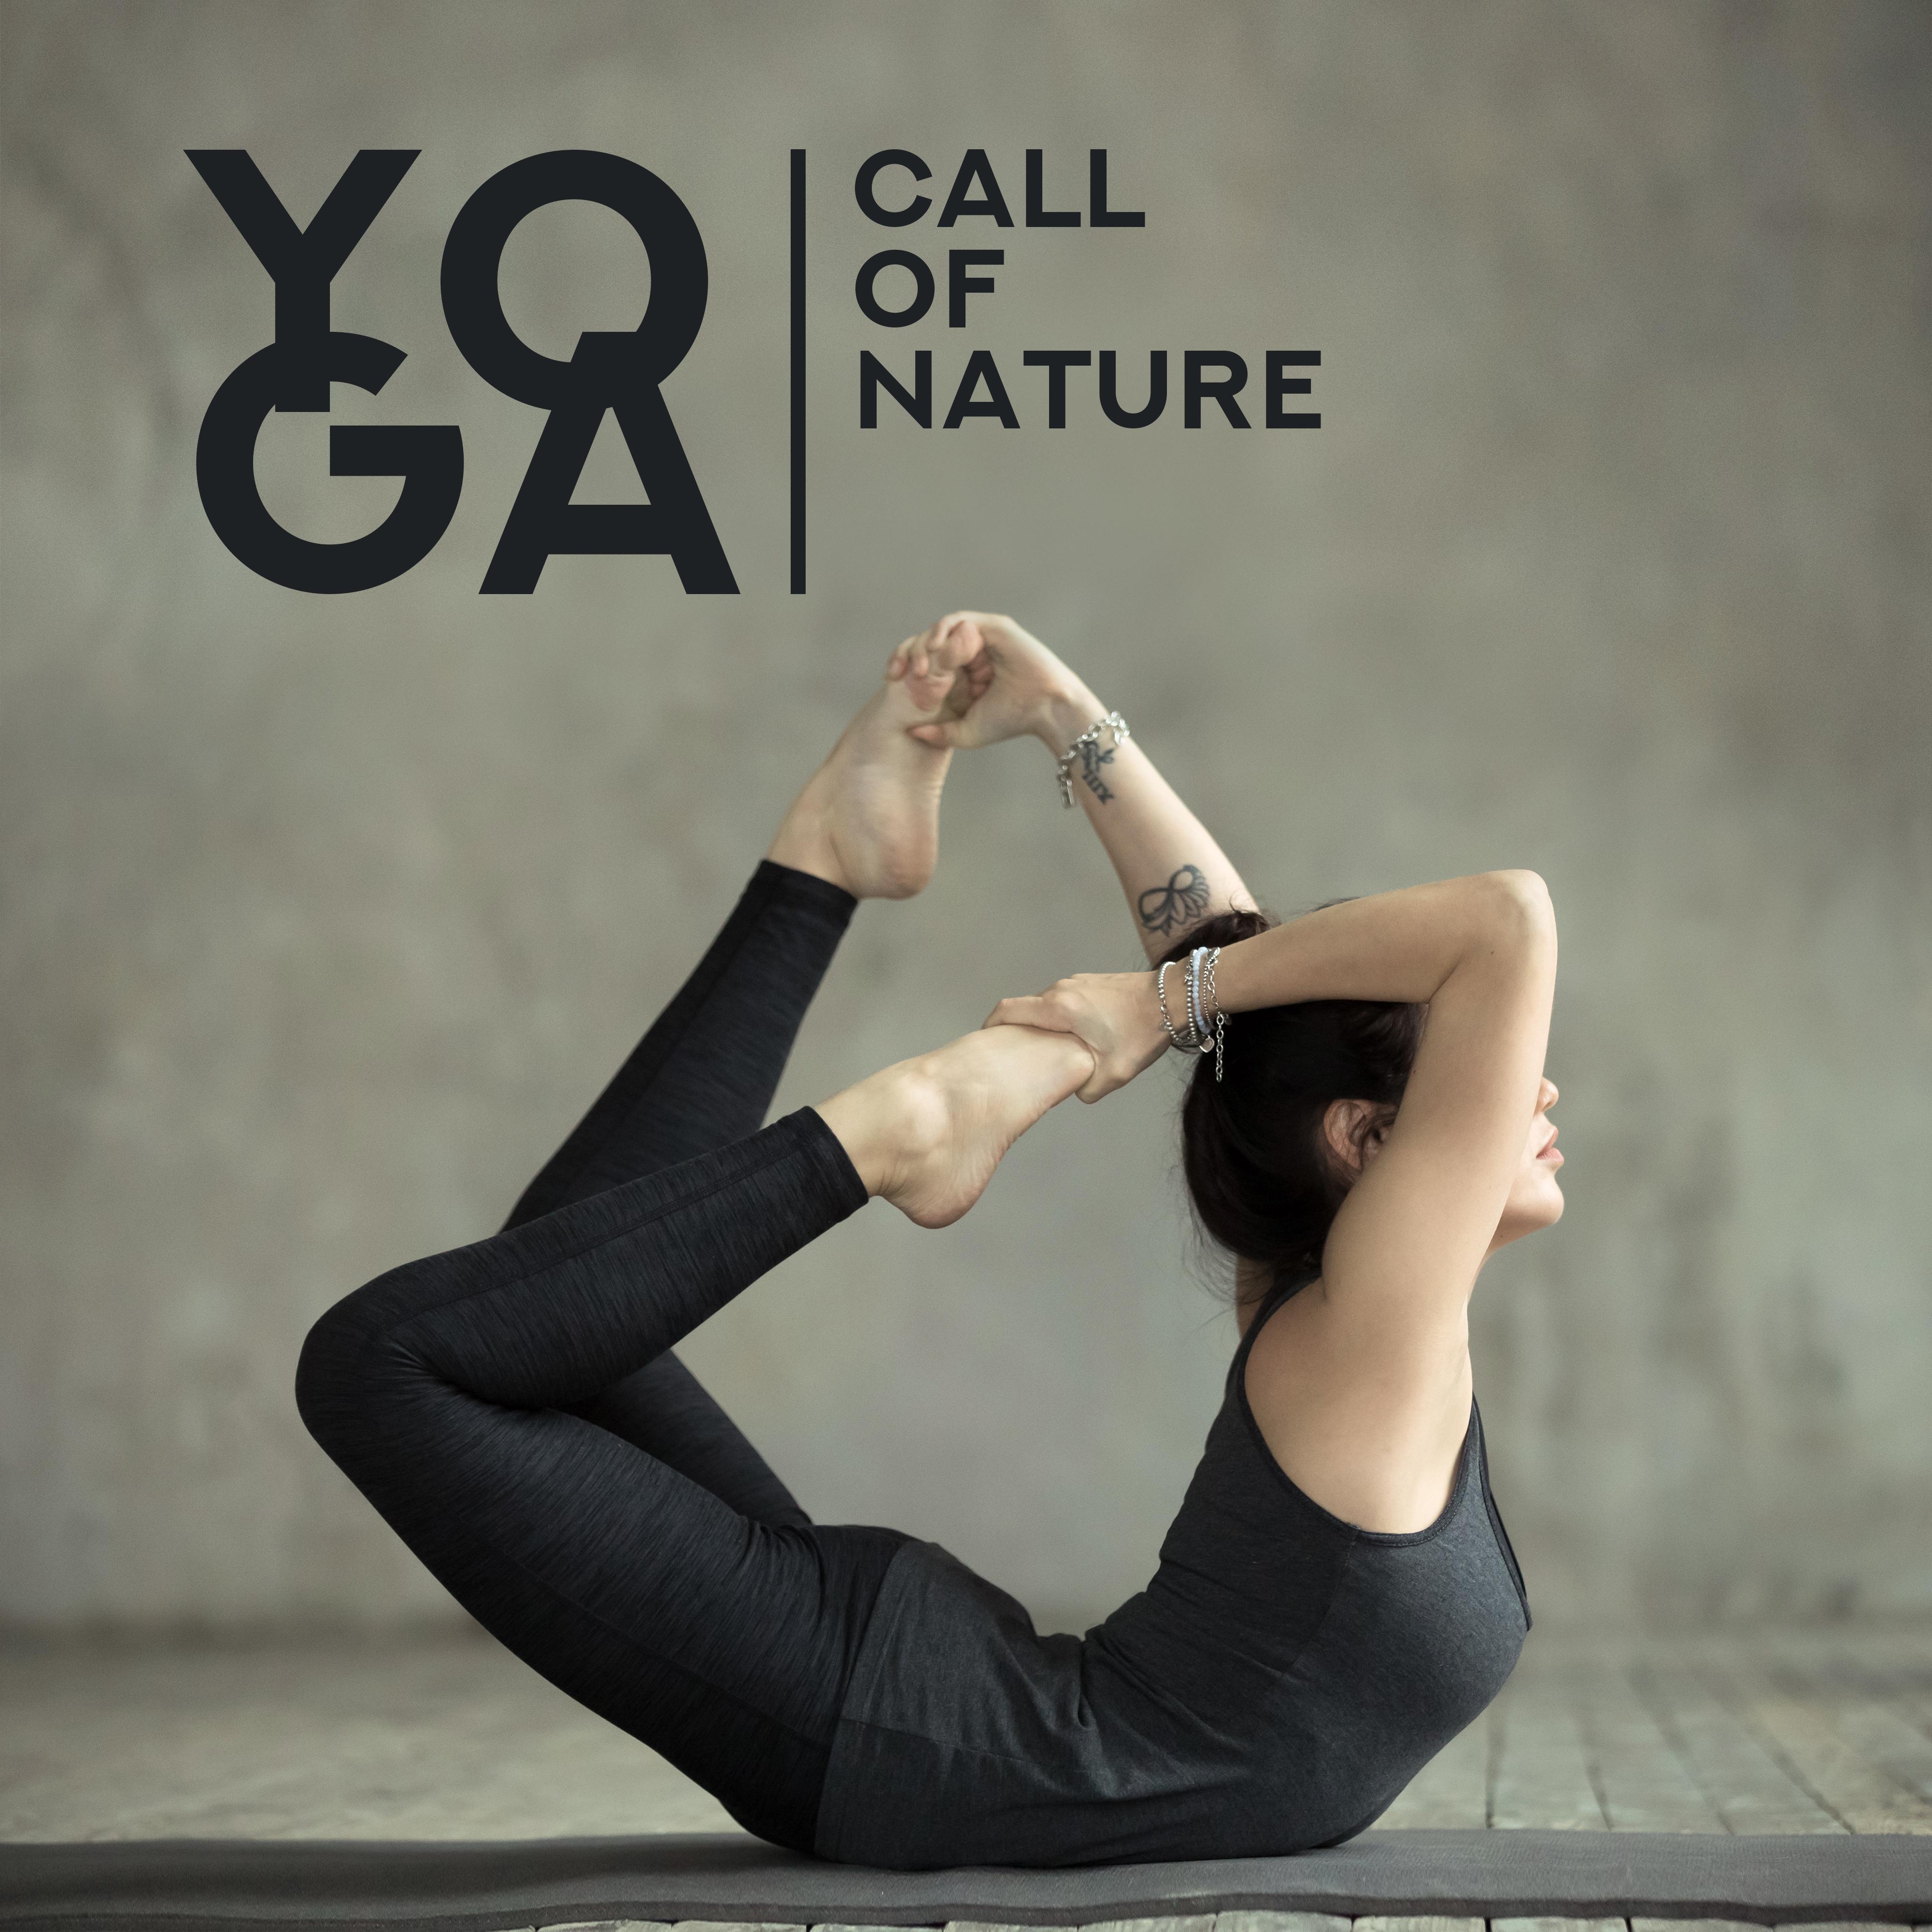 Yoga Call of Nature: 2019 New Age Ambient & Nature Music for Meditation & Relaxation, Calming Zen Sounds, Healing Chakra Songs, Zen Spiritual